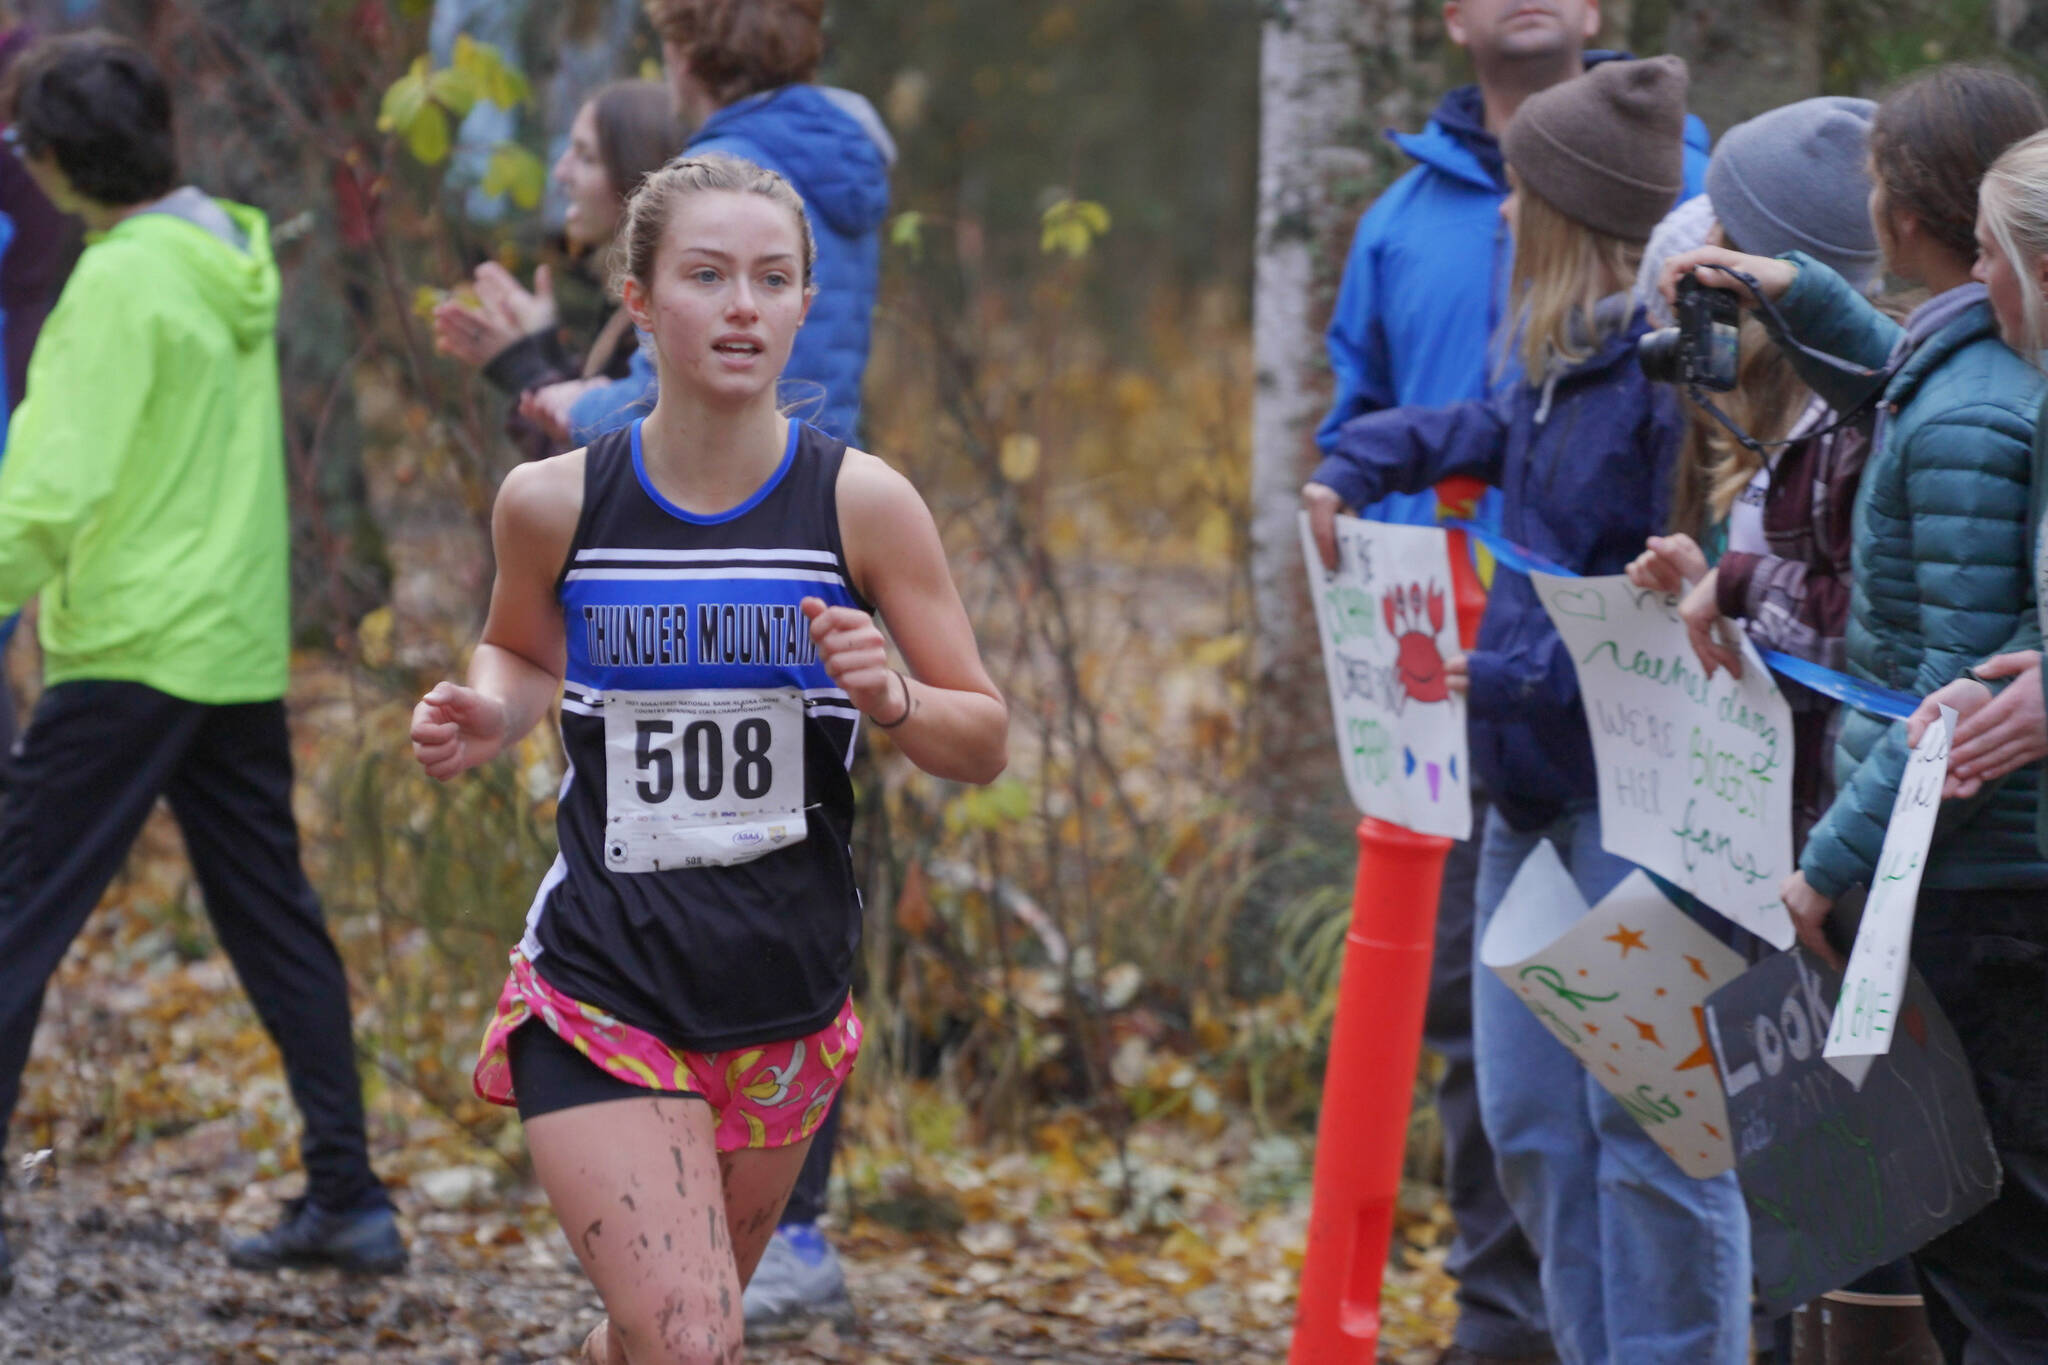 Thunder Mountain High School’s Kiah Dihle came in third for the state of Alaska in the Alaska School Activities Association’s 2021 state championships, hosted in Anchorage, on Oct. 9, 2021. (Courtesy photo / Kent Mearig)